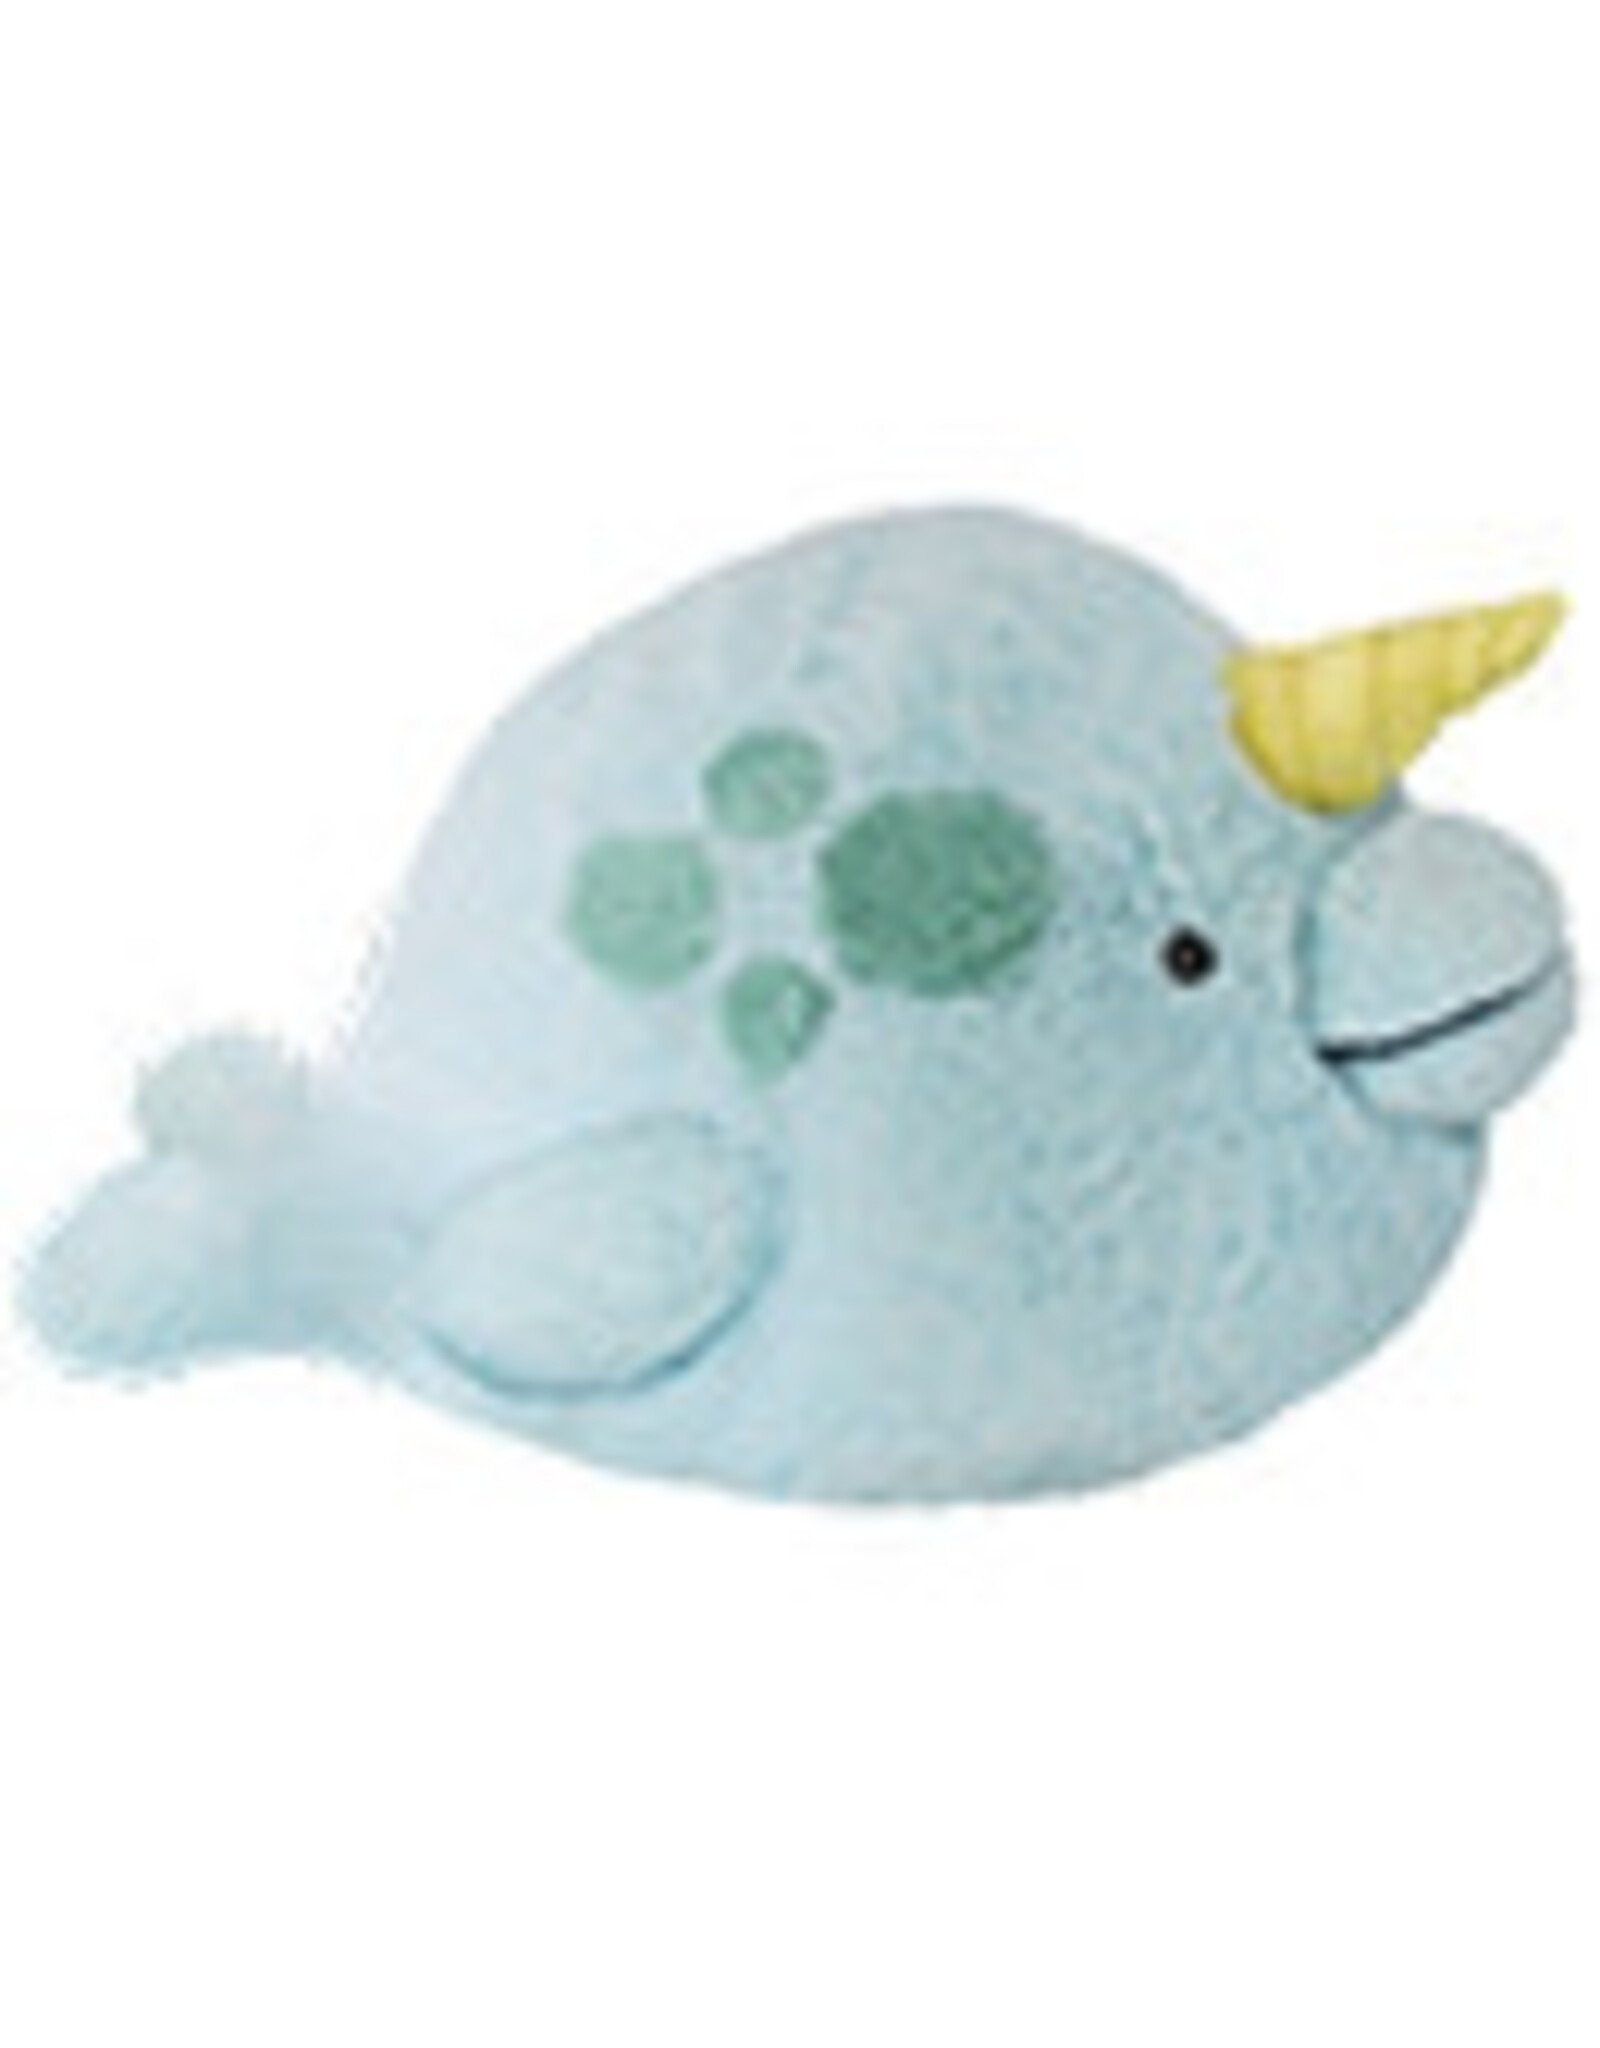 15" Narwhal Squishable